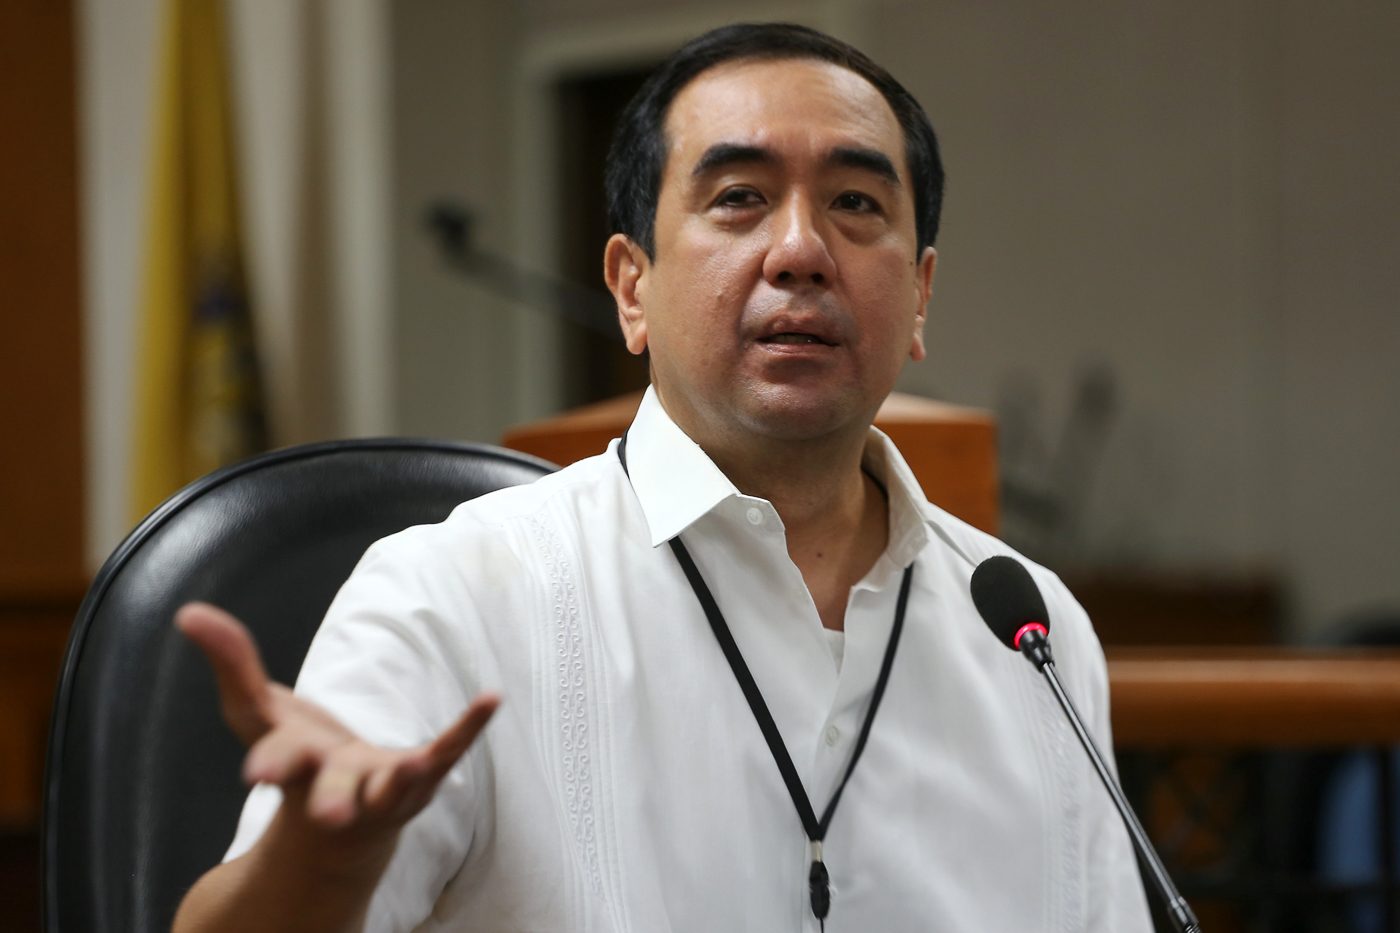 Comelec chairman Andres Bautista gets emotional during a press conference at the Comelec main office in Manila on August 7, 2017 regarding his marital dispute with his wife Patricia Cruz-Bautista. Photo by Ben Nabong/Rappler 